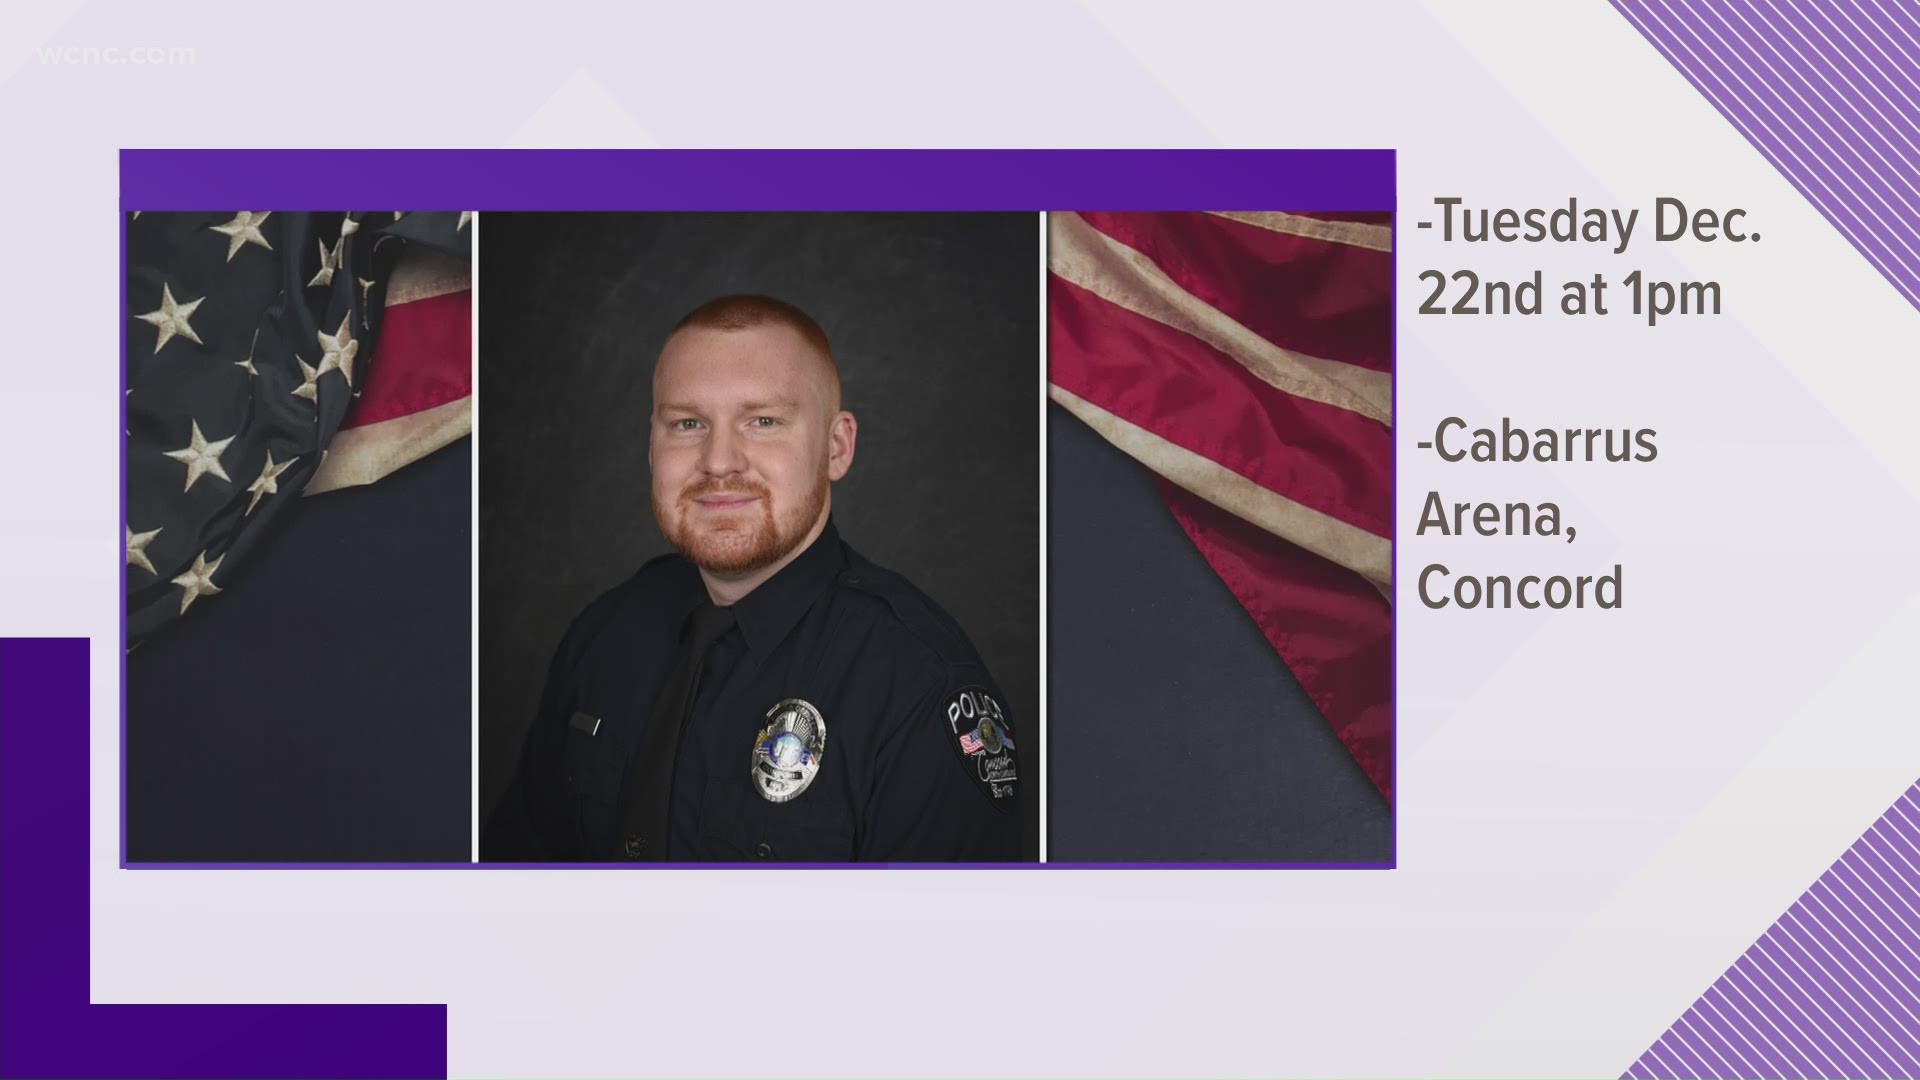 Officer Jason Shuping, 25, was shot and killed responding to a carjacking on Wednesday night when they located the suspect at the Sonic restaurant on Gateway Lane.